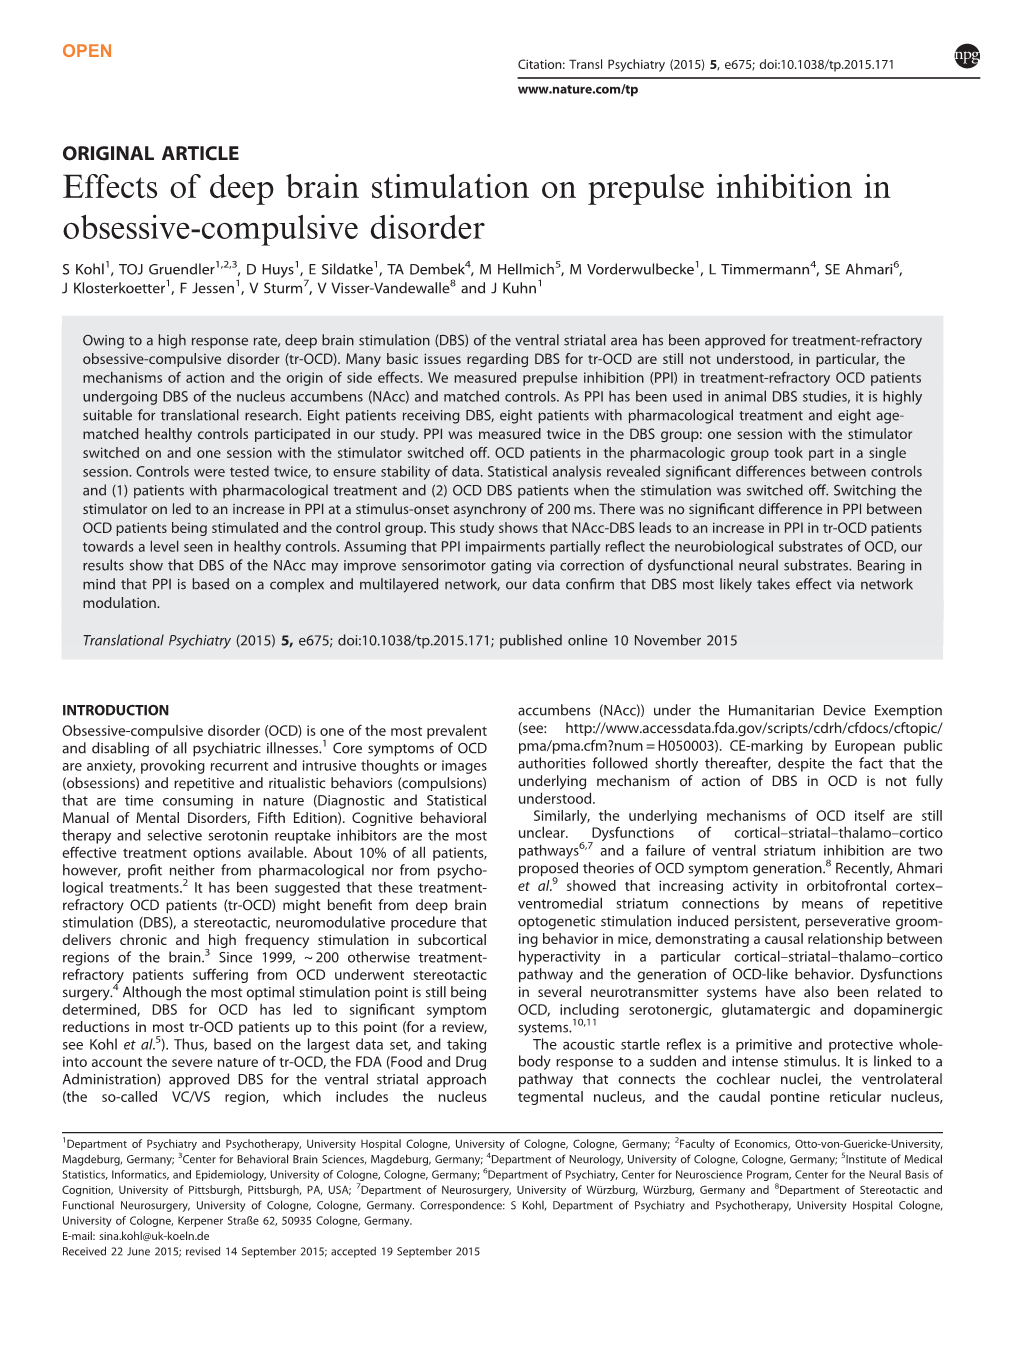 Effects of Deep Brain Stimulation on Prepulse Inhibition in Obsessive-Compulsive Disorder